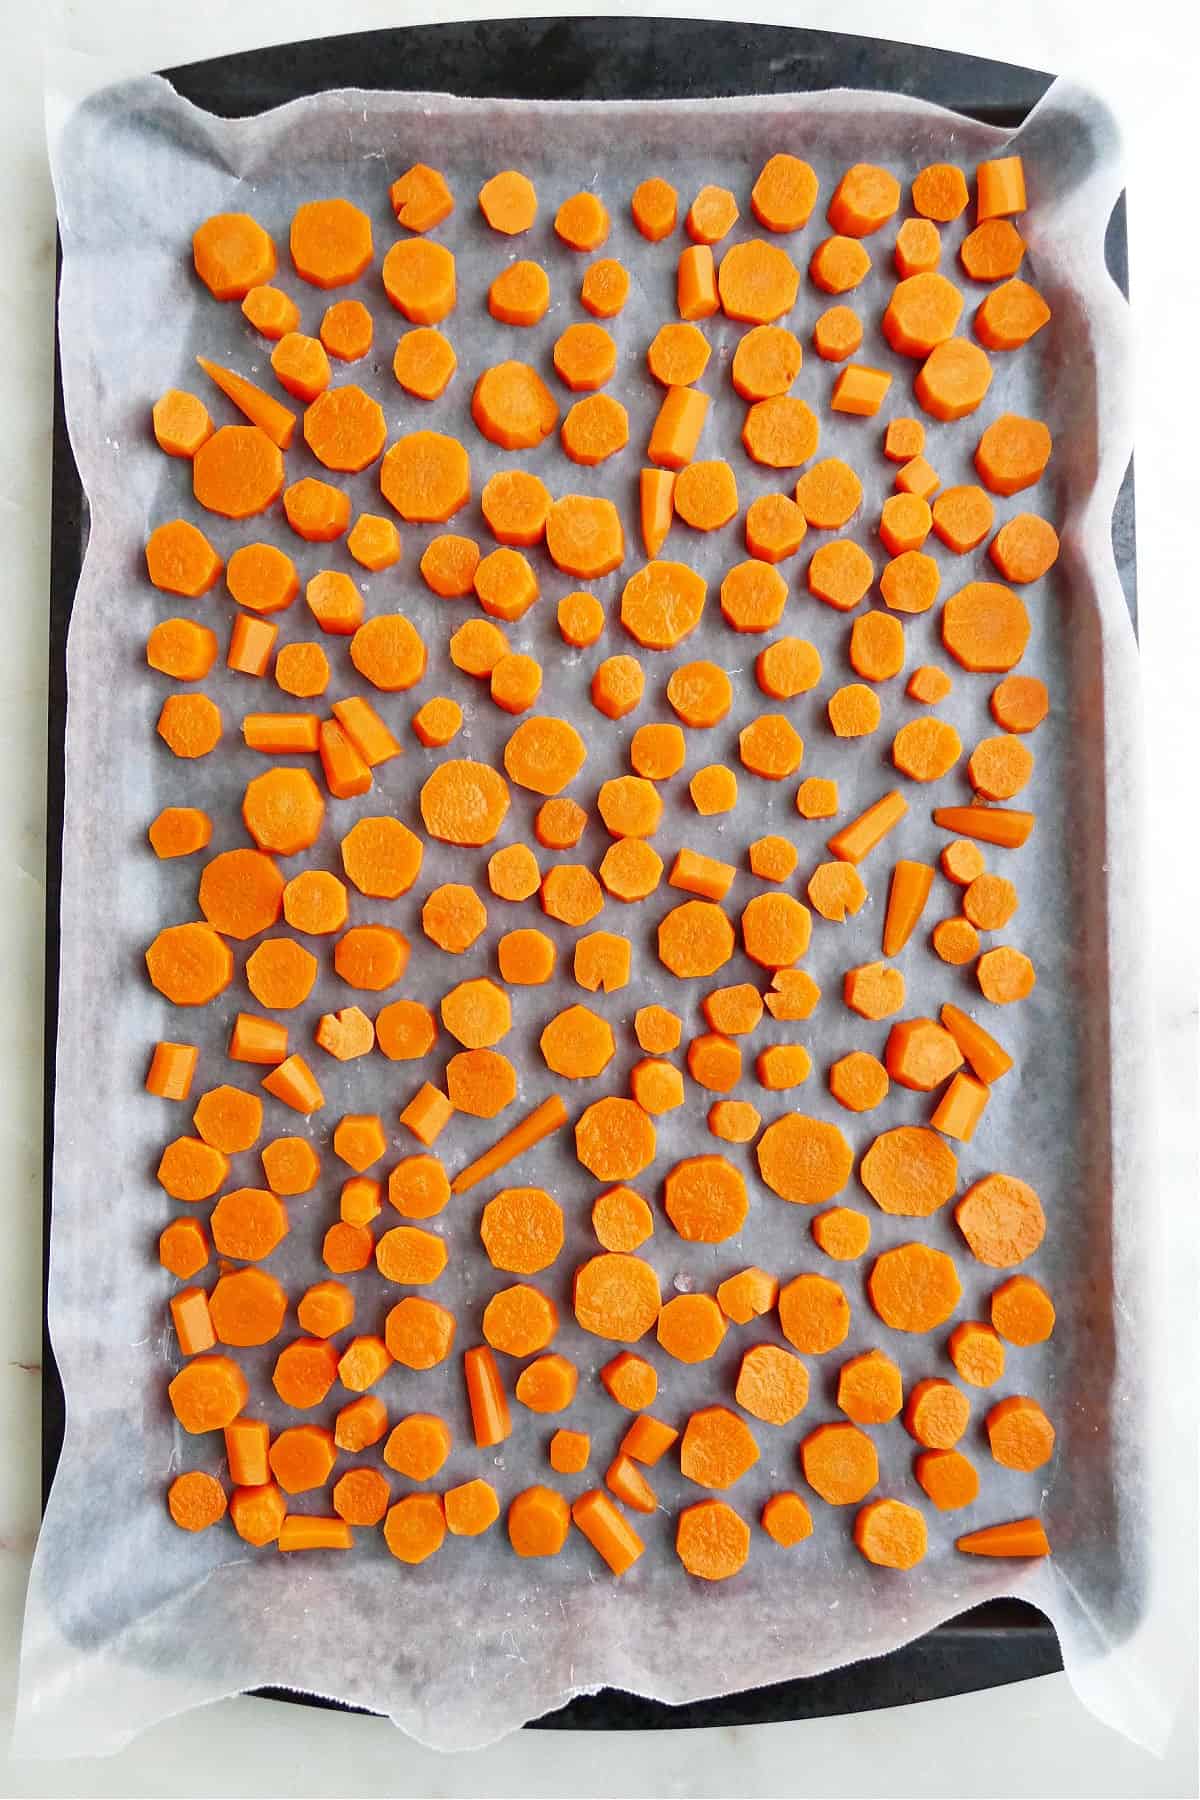 baking sheet lined with wax paper and frozen carrot medallions on a counter